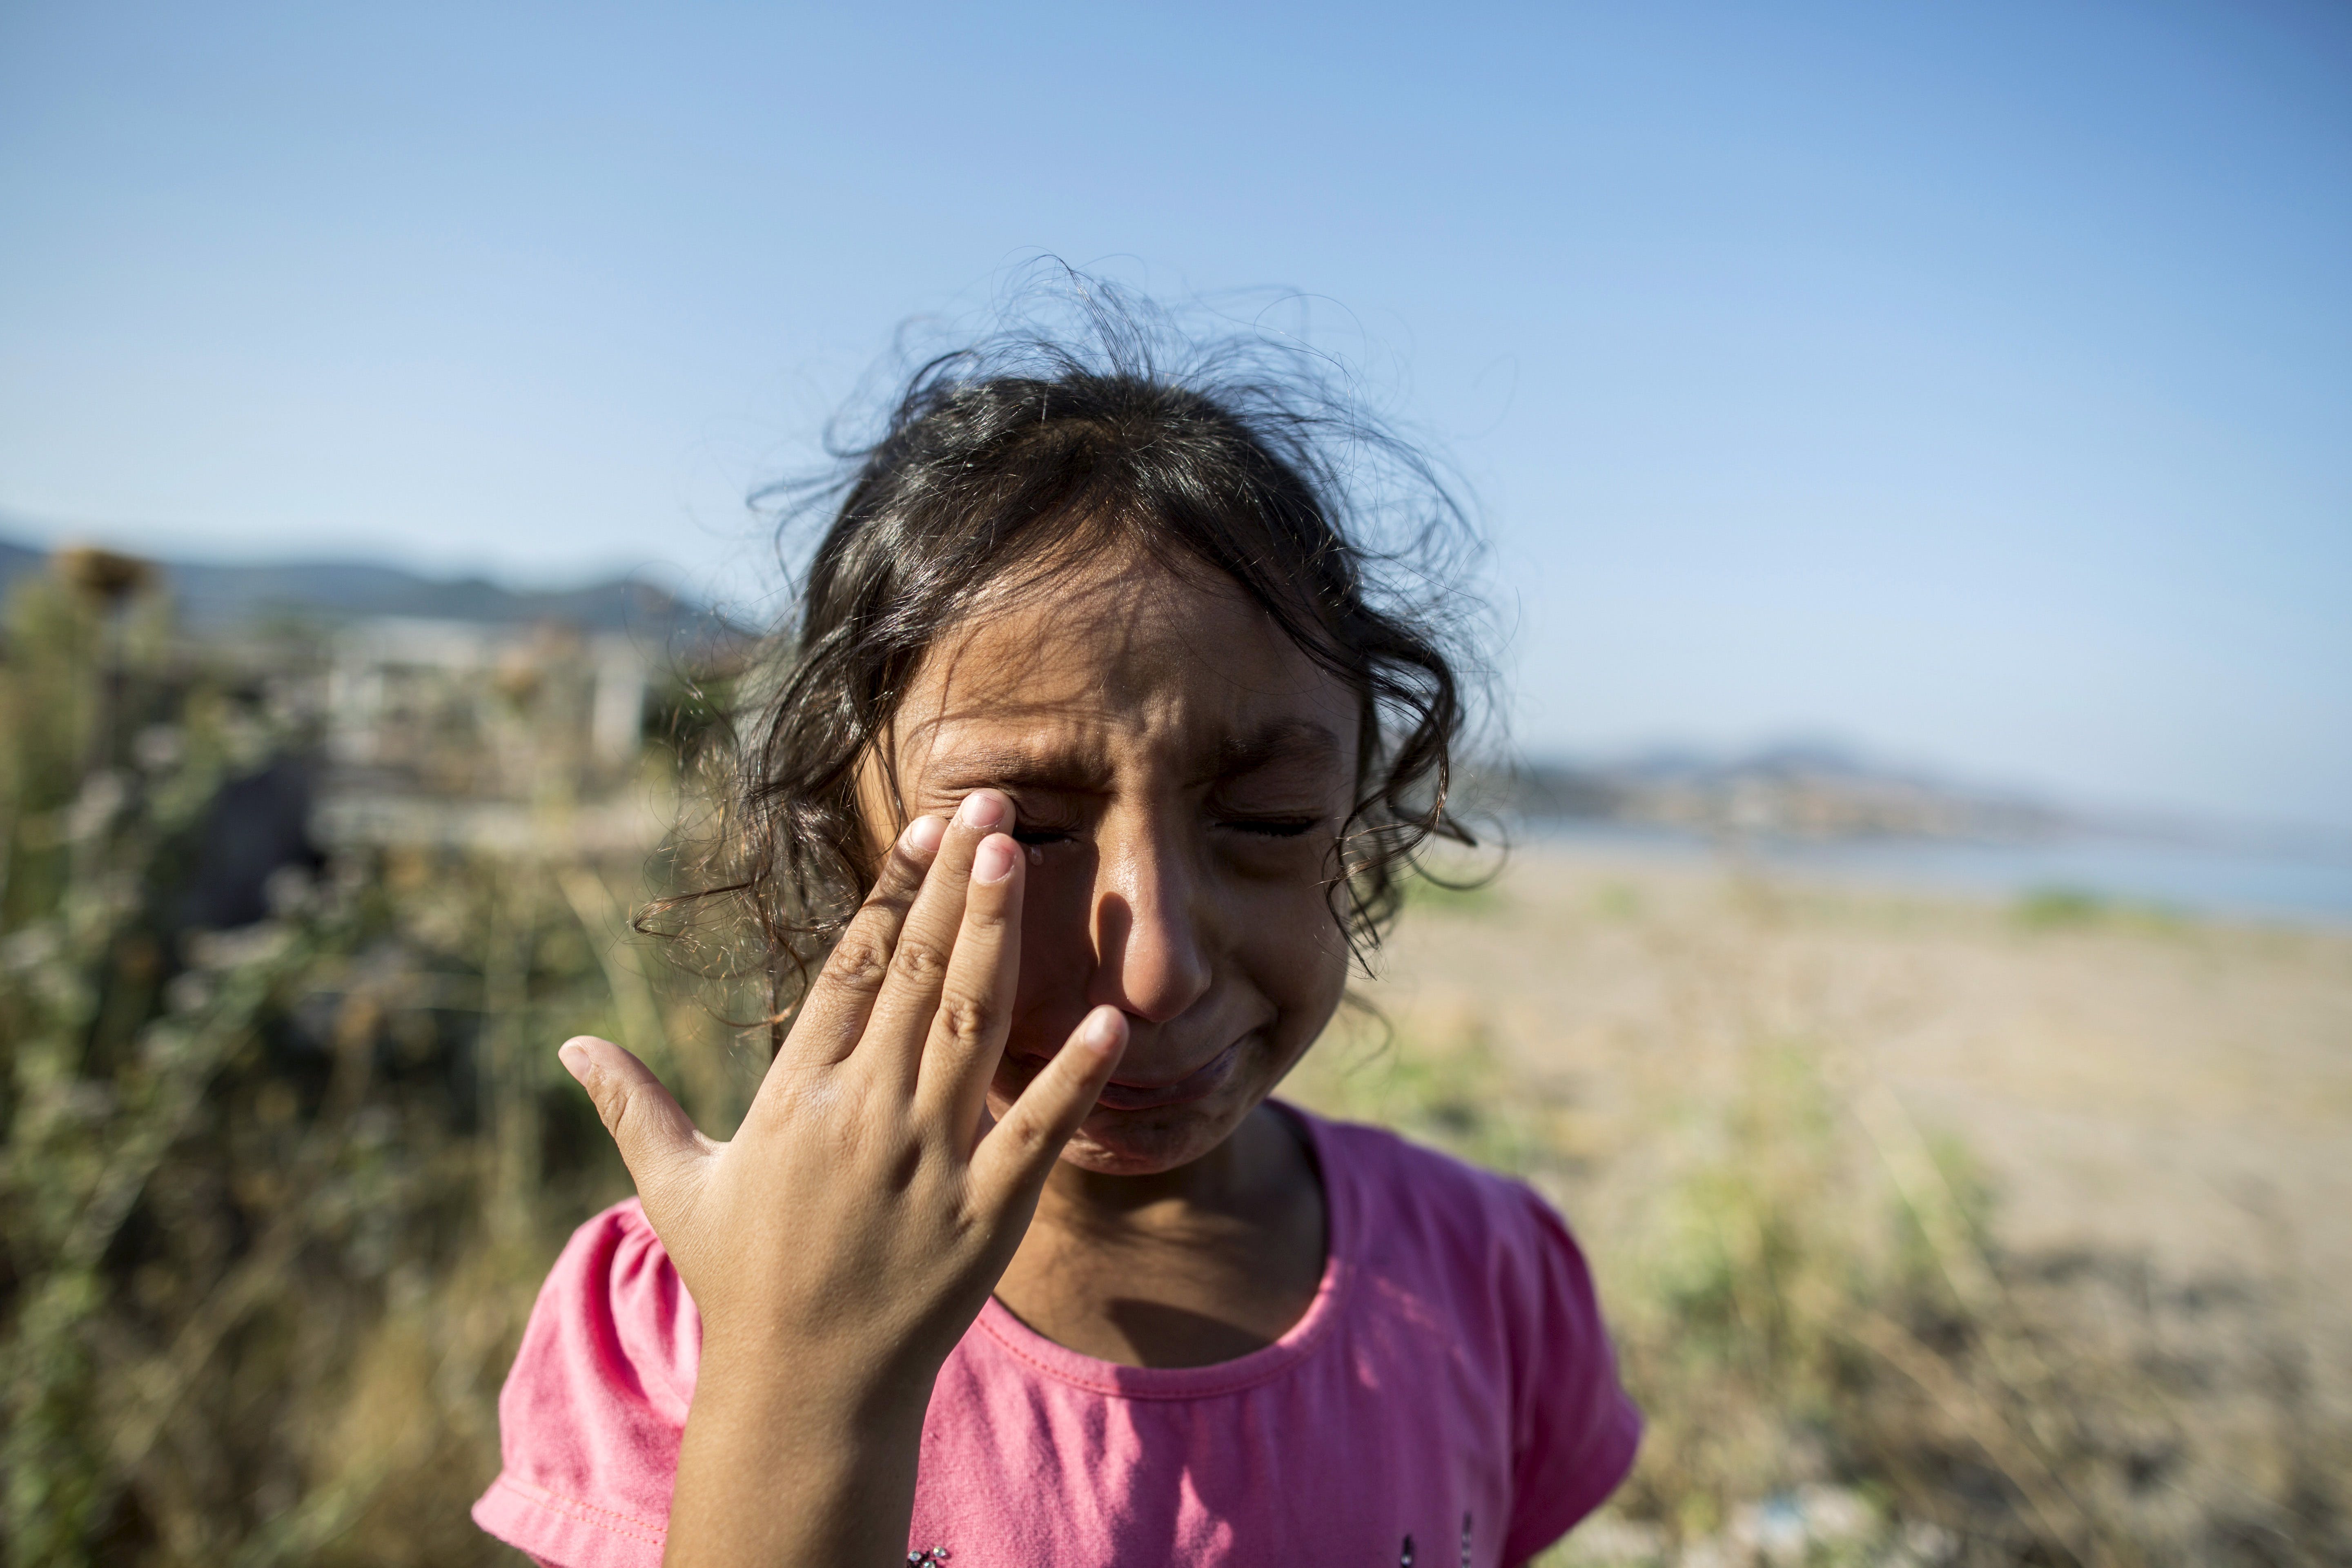 Yasmine, a 6-year-old migrant from Deir Al Zour in war-torn Syria, cries at the beach after arriving on the Greek island of Lesbos